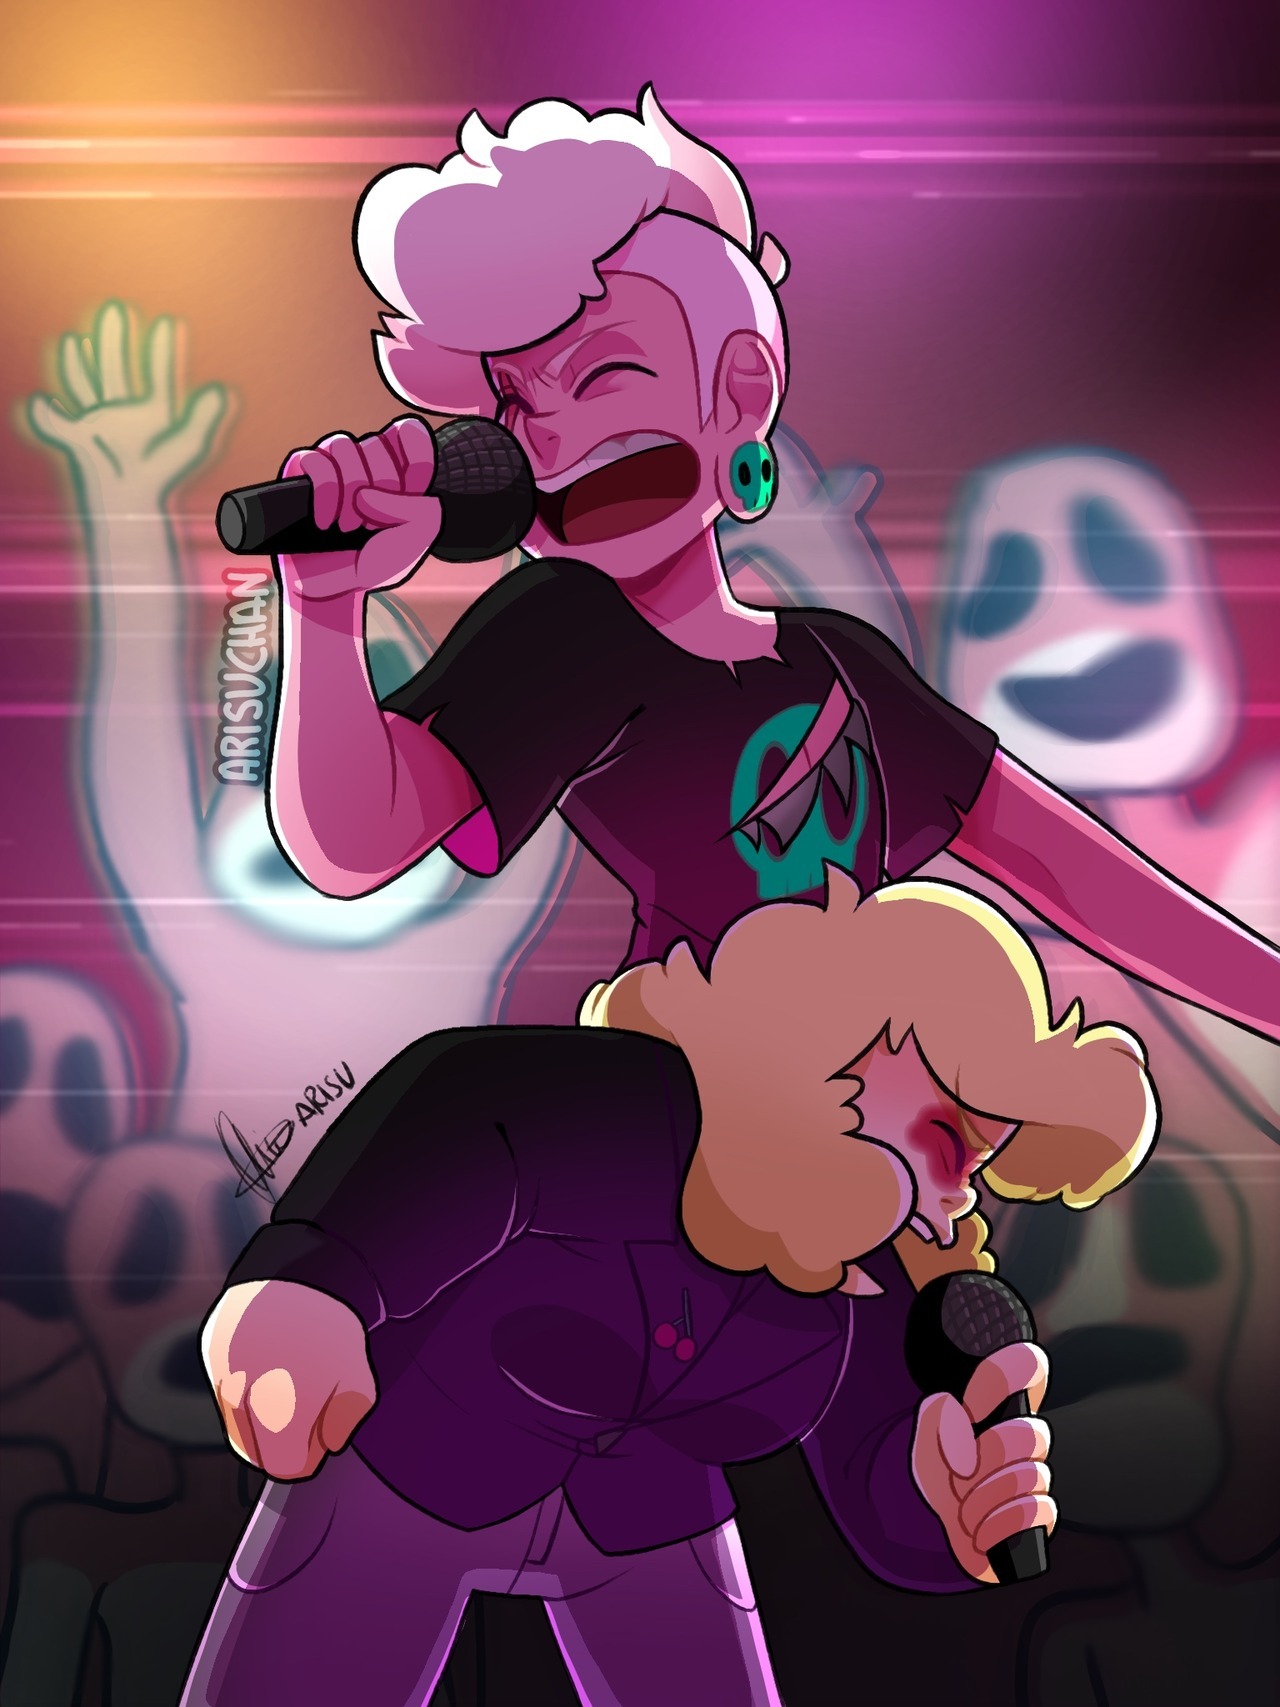 CAN’T THESE TWO JUST GET A DUET ALREADY?! Also I like to think that Lars kept the skull shirt cause I love it bye